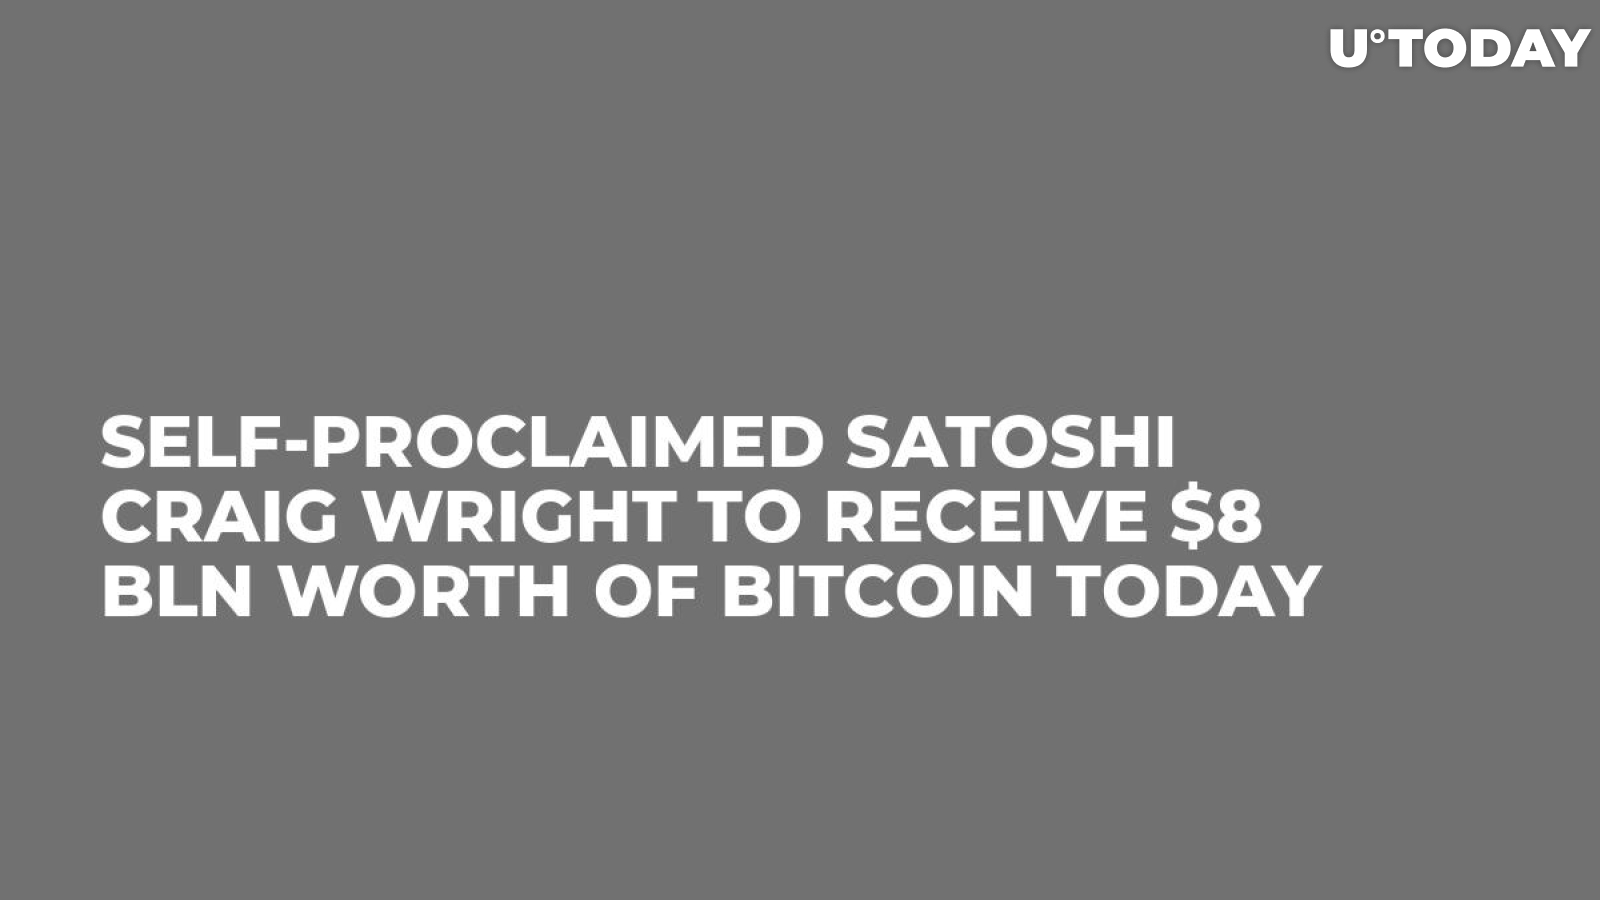 Self-Proclaimed Satoshi Craig Wright to Receive $8 Bln Worth of Bitcoin Today